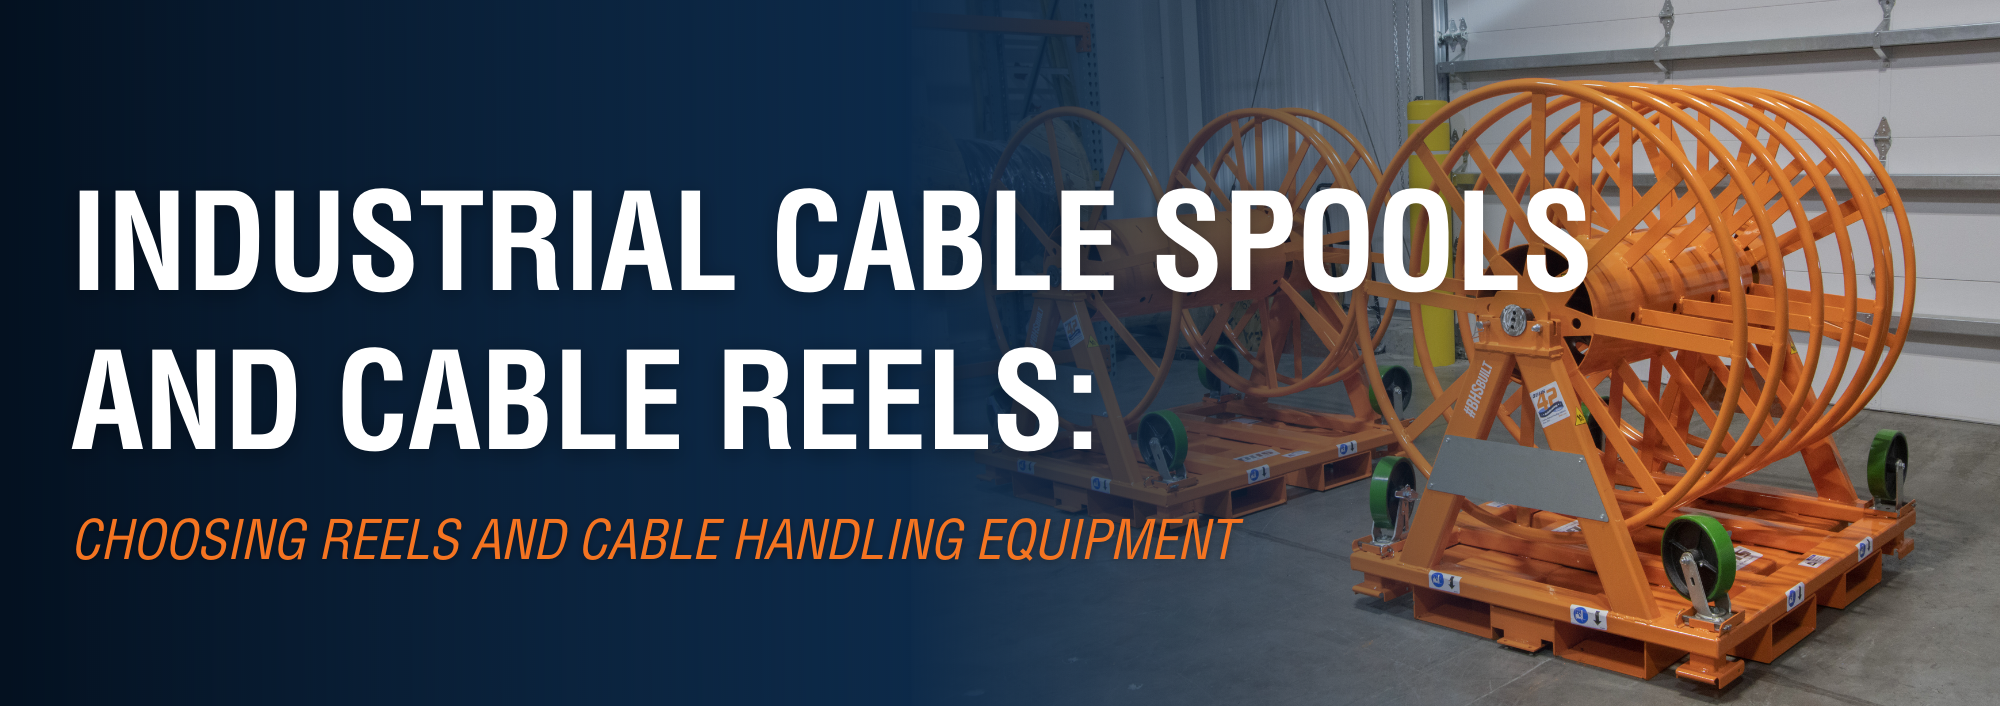 Industrial Cable Spools and Cable Reels: Choosing Reels and Cable Handling  Equipment - Blog